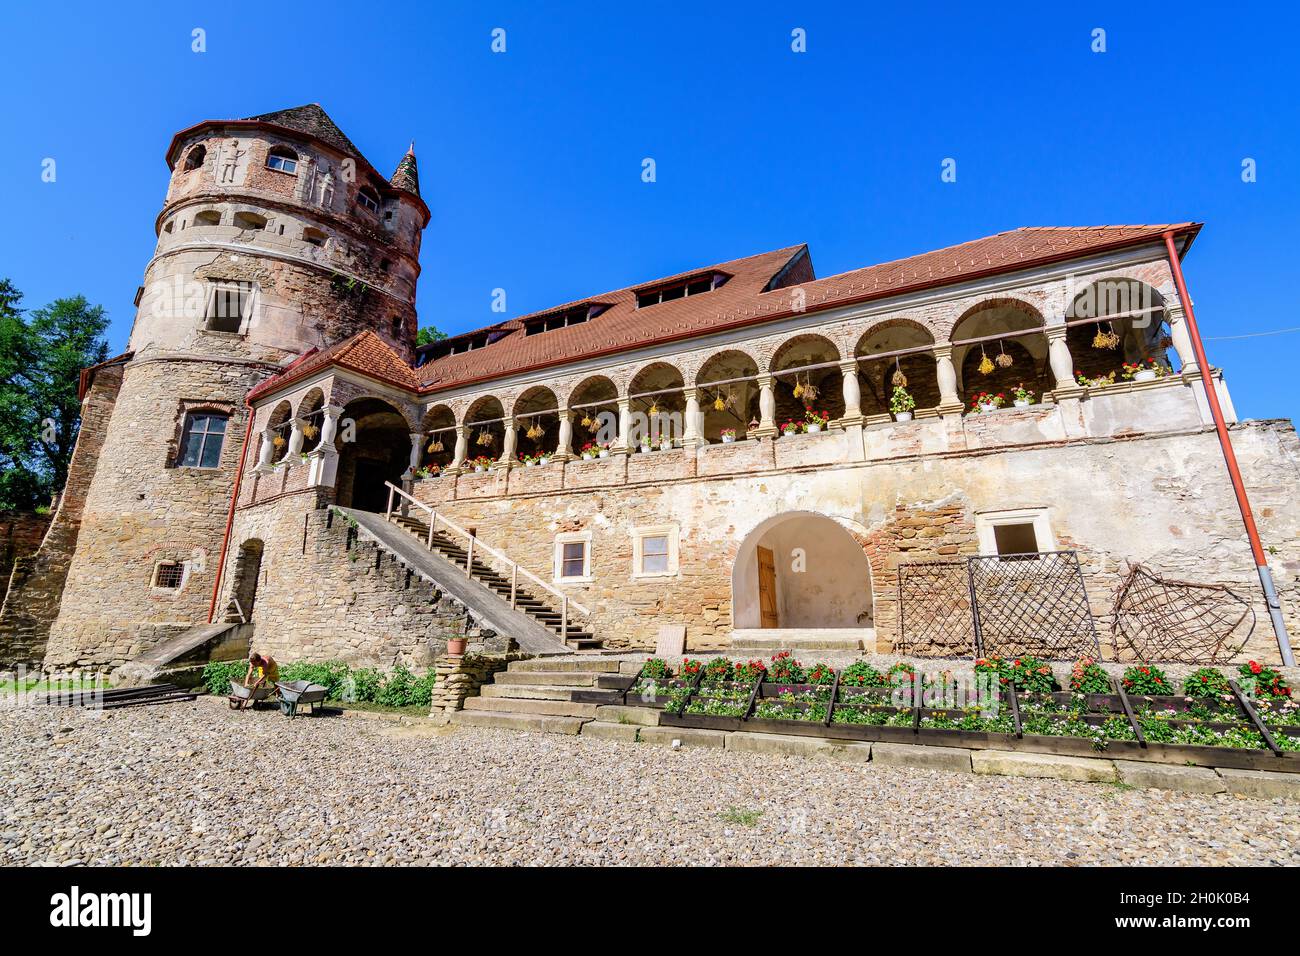 Old building in the renovation process at Cris Bethlen Castle in Mures county, in Transylvania (Transilvania) region, Romania in summer Stock Photo